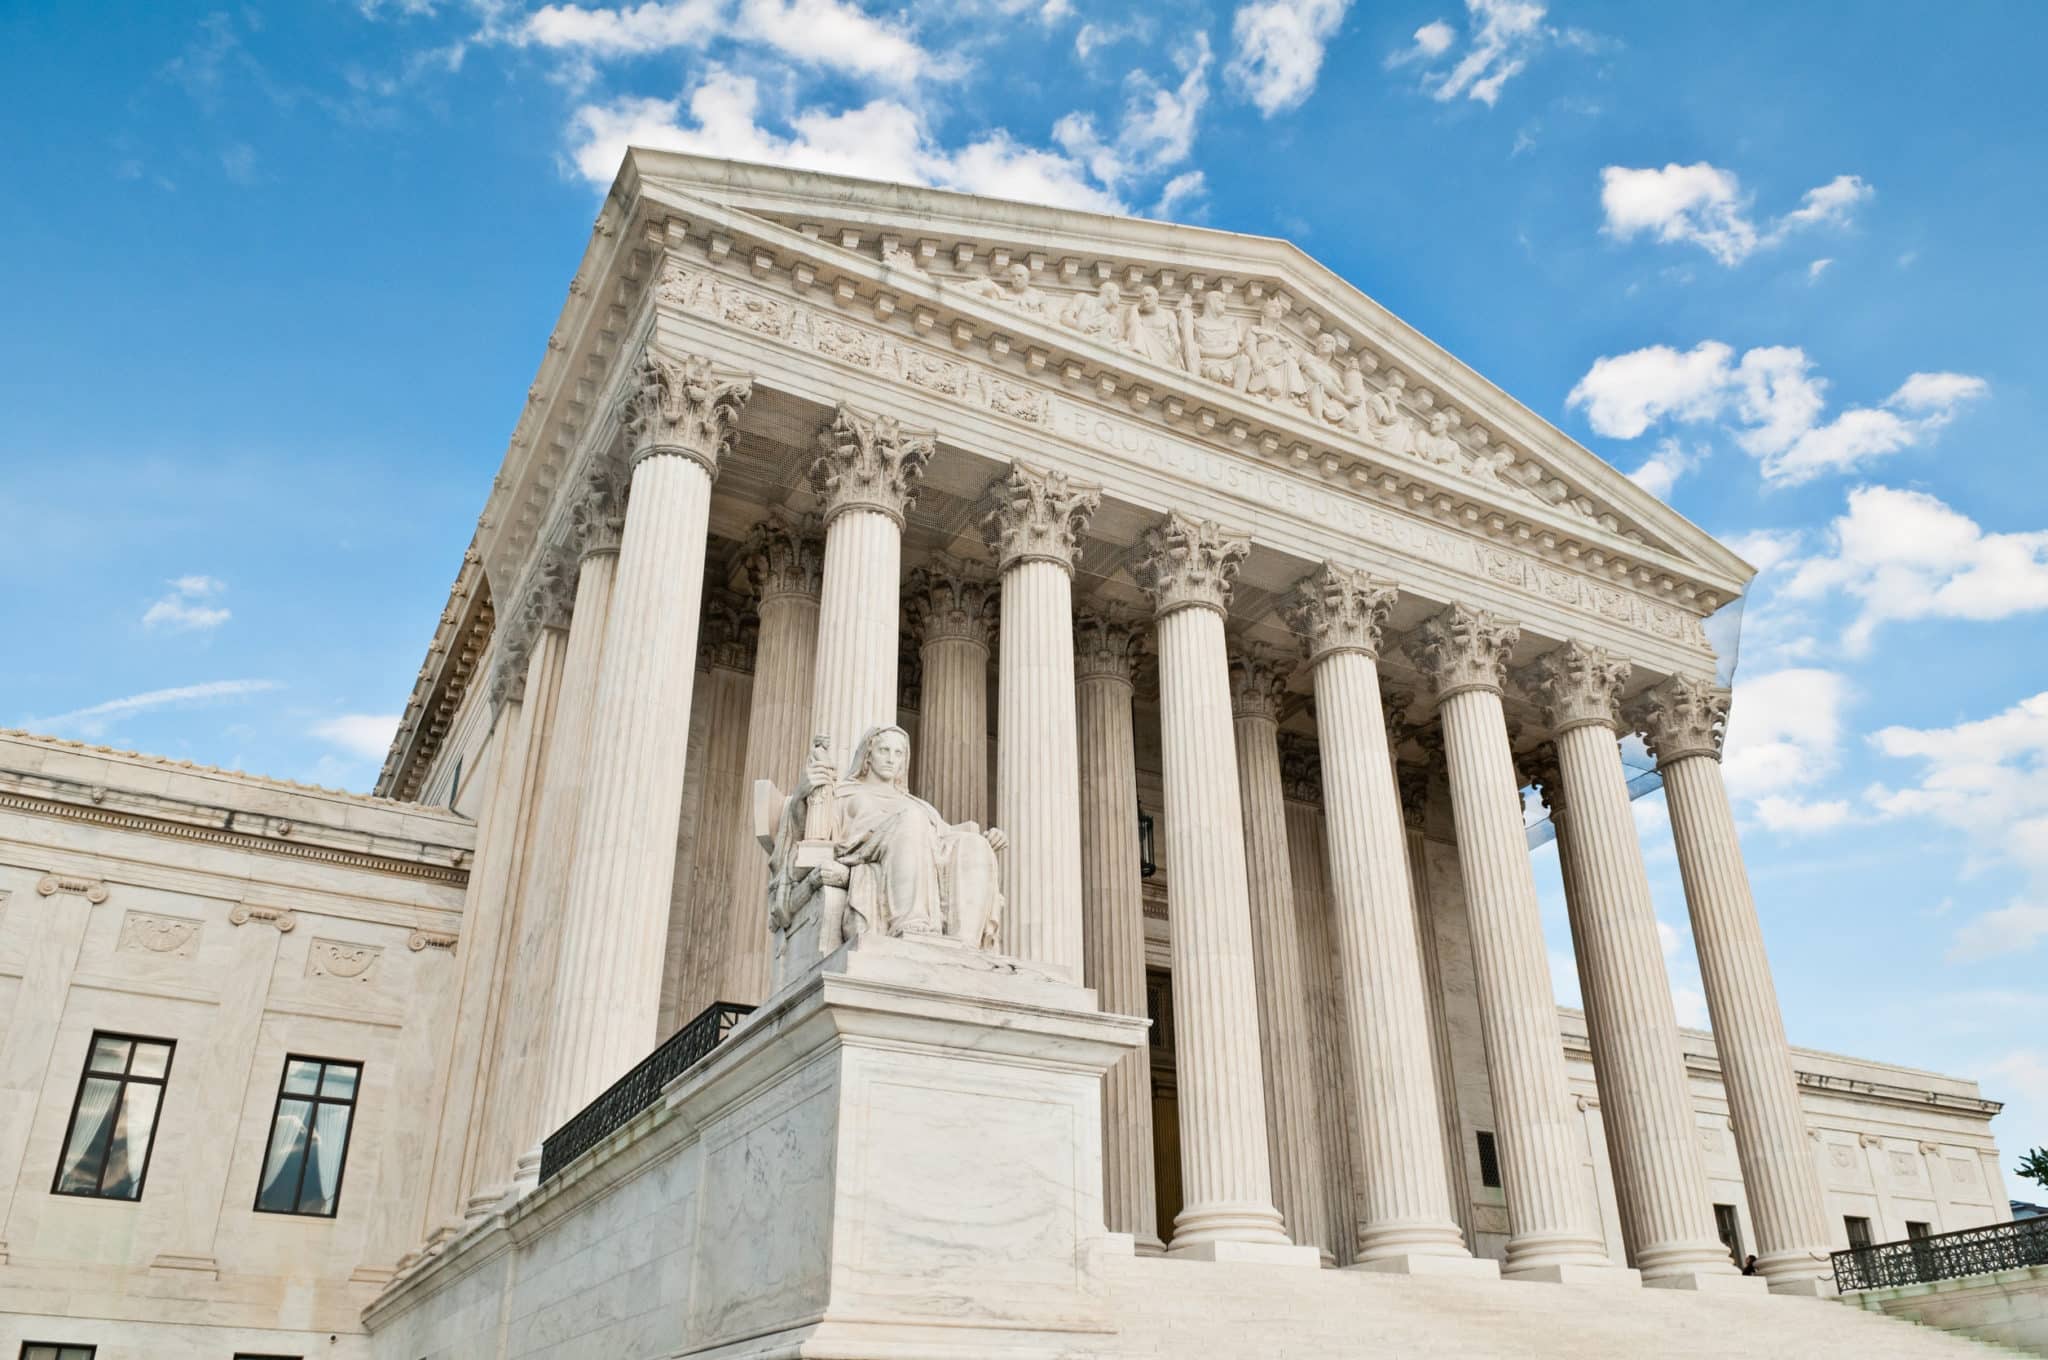 The United States Supreme Court building in Washington DC